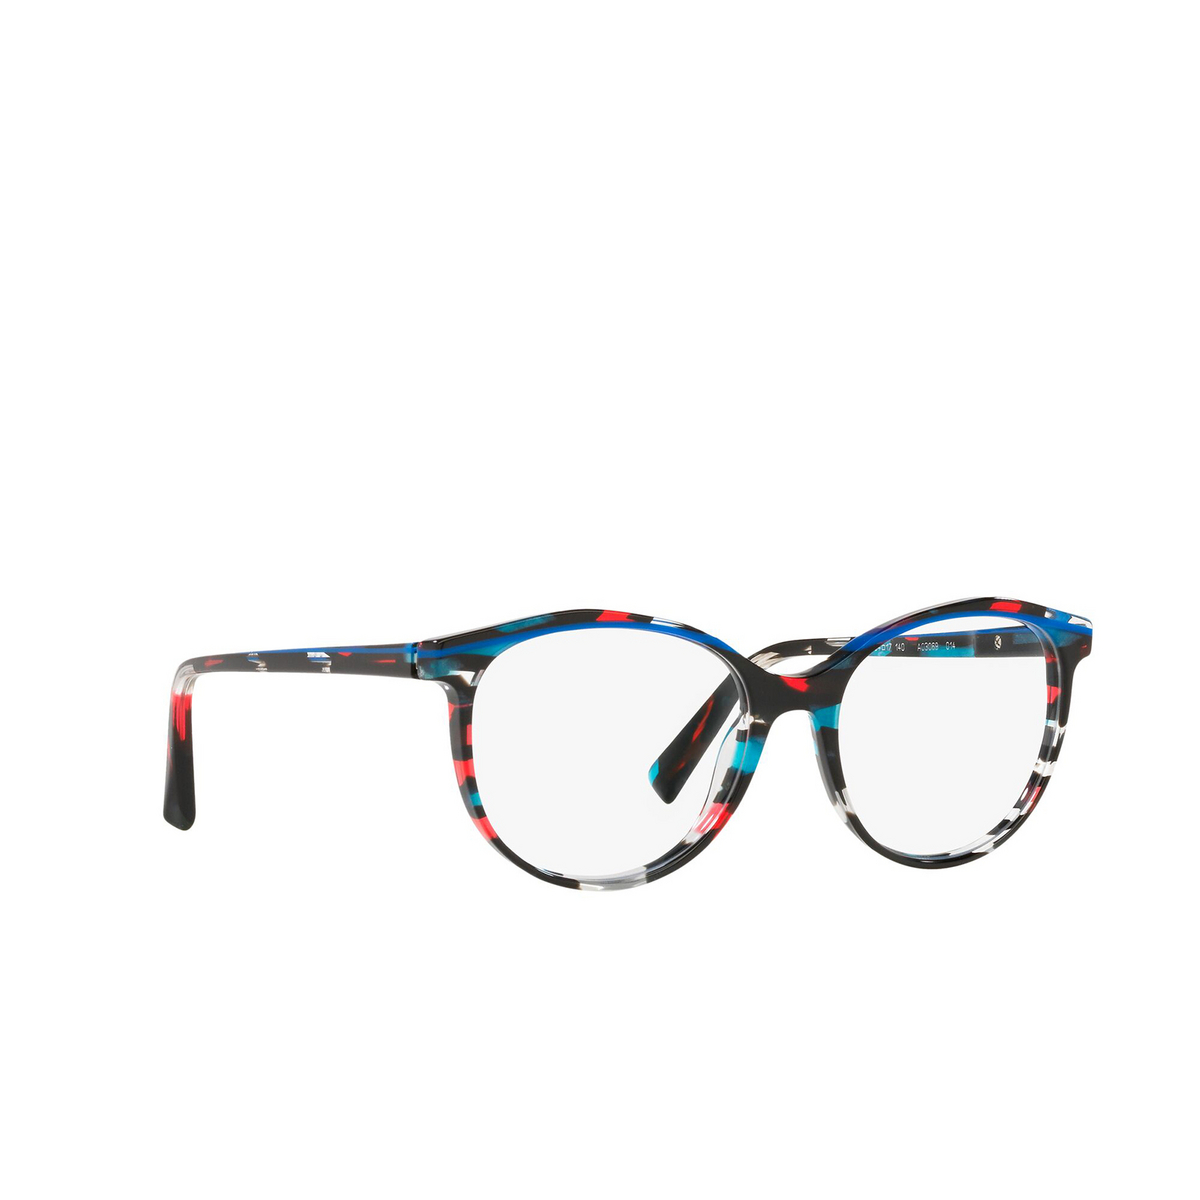 Alain Mikli® Square Eyeglasses: A03069 color Red Teal Stained Glass 014 - three-quarters view.